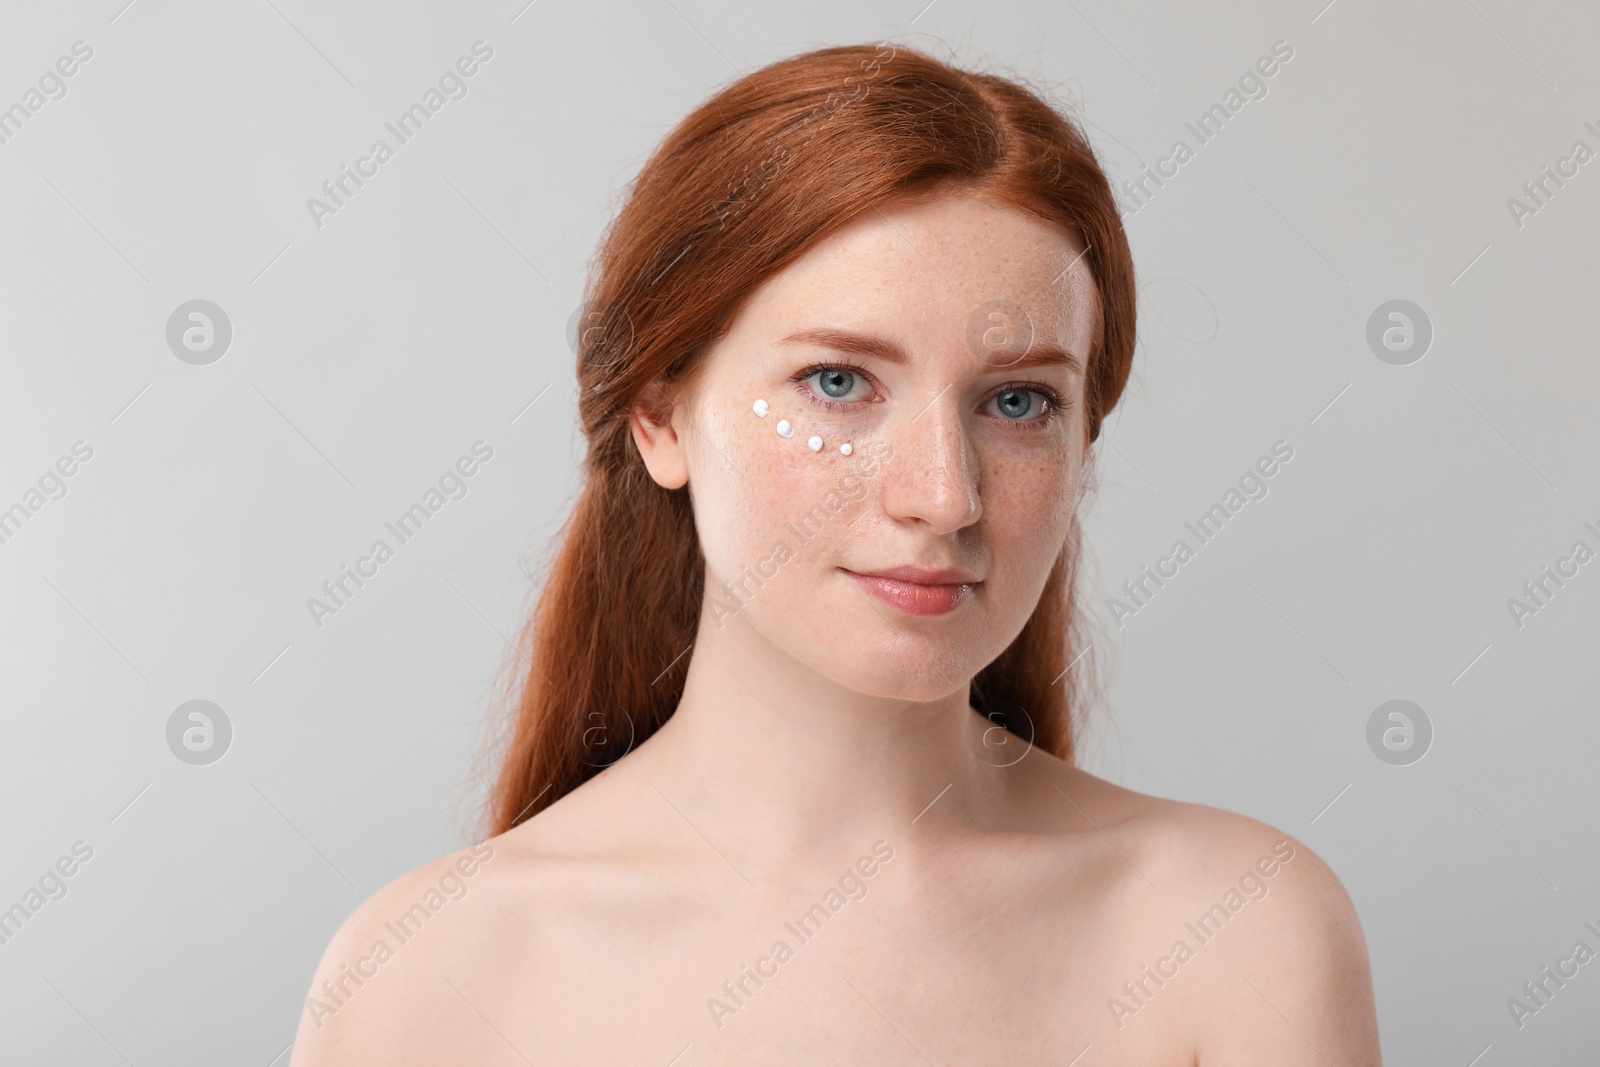 Photo of Beautiful woman with freckles and cream on her face against grey background